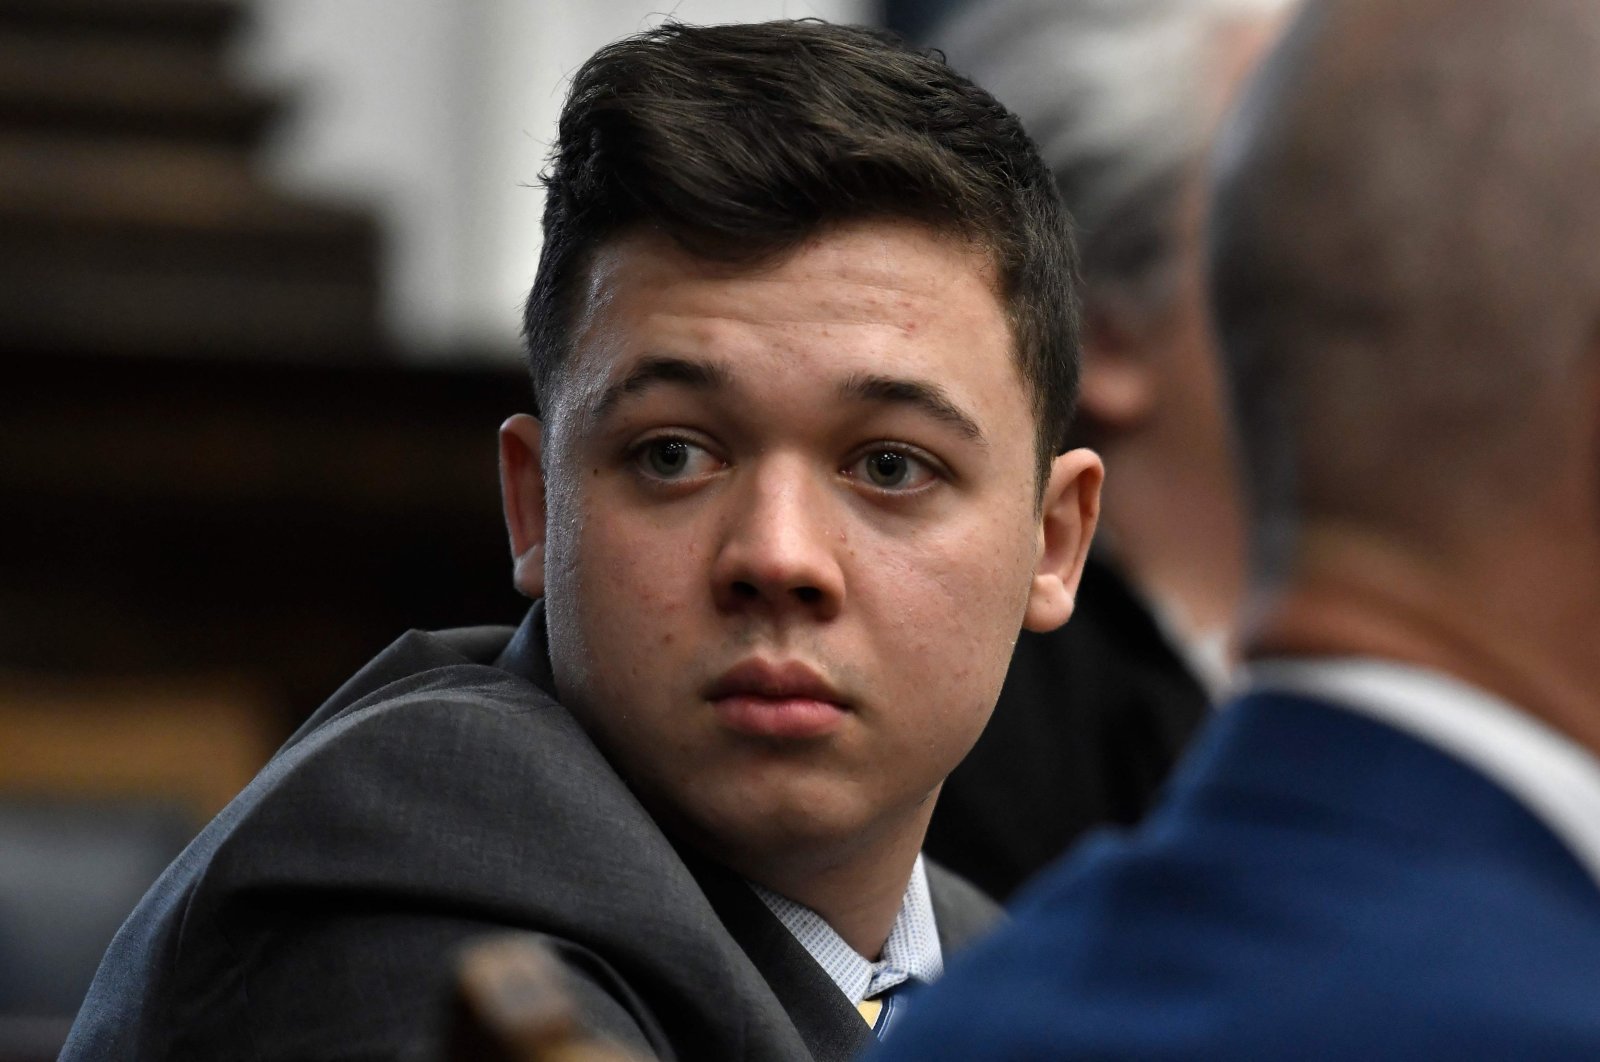 Kyle Rittenhouse looks back as attorneys discuss items in the motion for mistrial presented by his defense during his trial at the Kenosha County Courthouse in Kenosha, Wisconsin, Nov. 17, 2021. (AFP Photo)